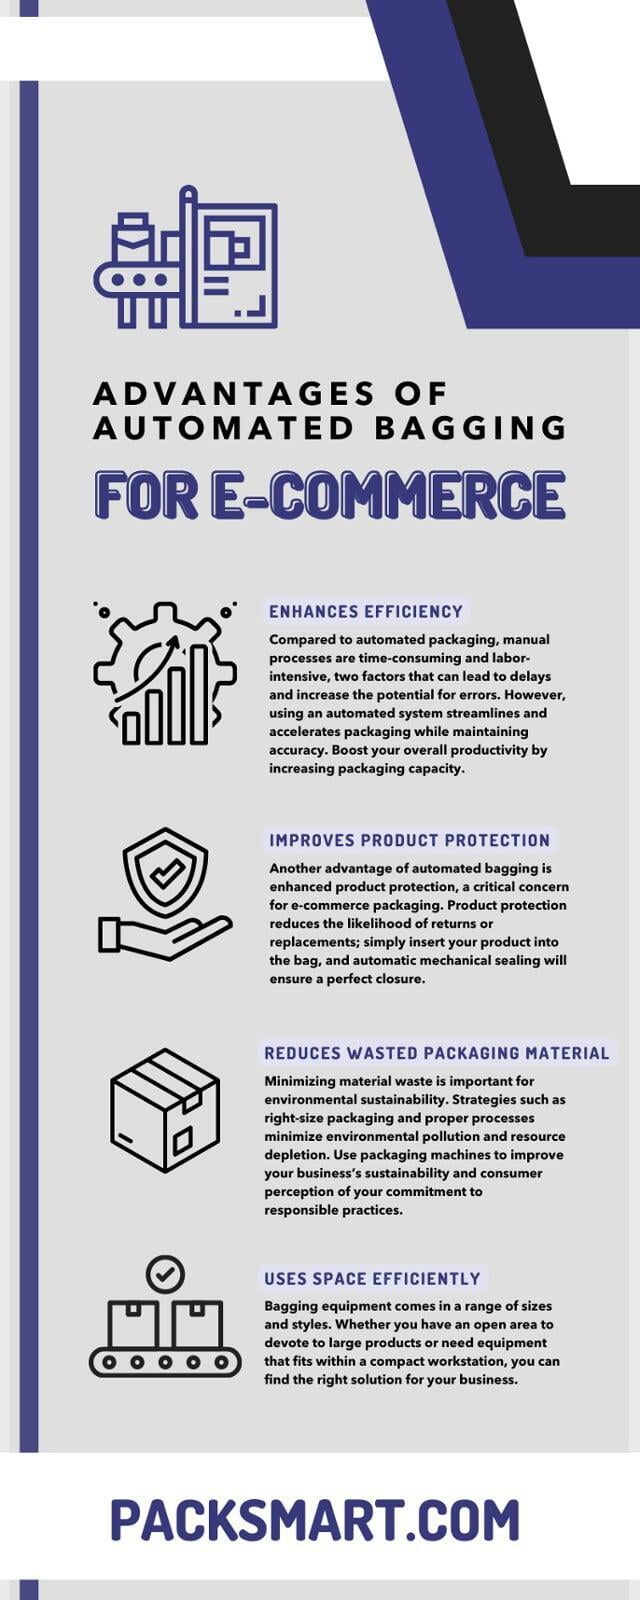 Advantages of Automated Bagging for E-Commerce